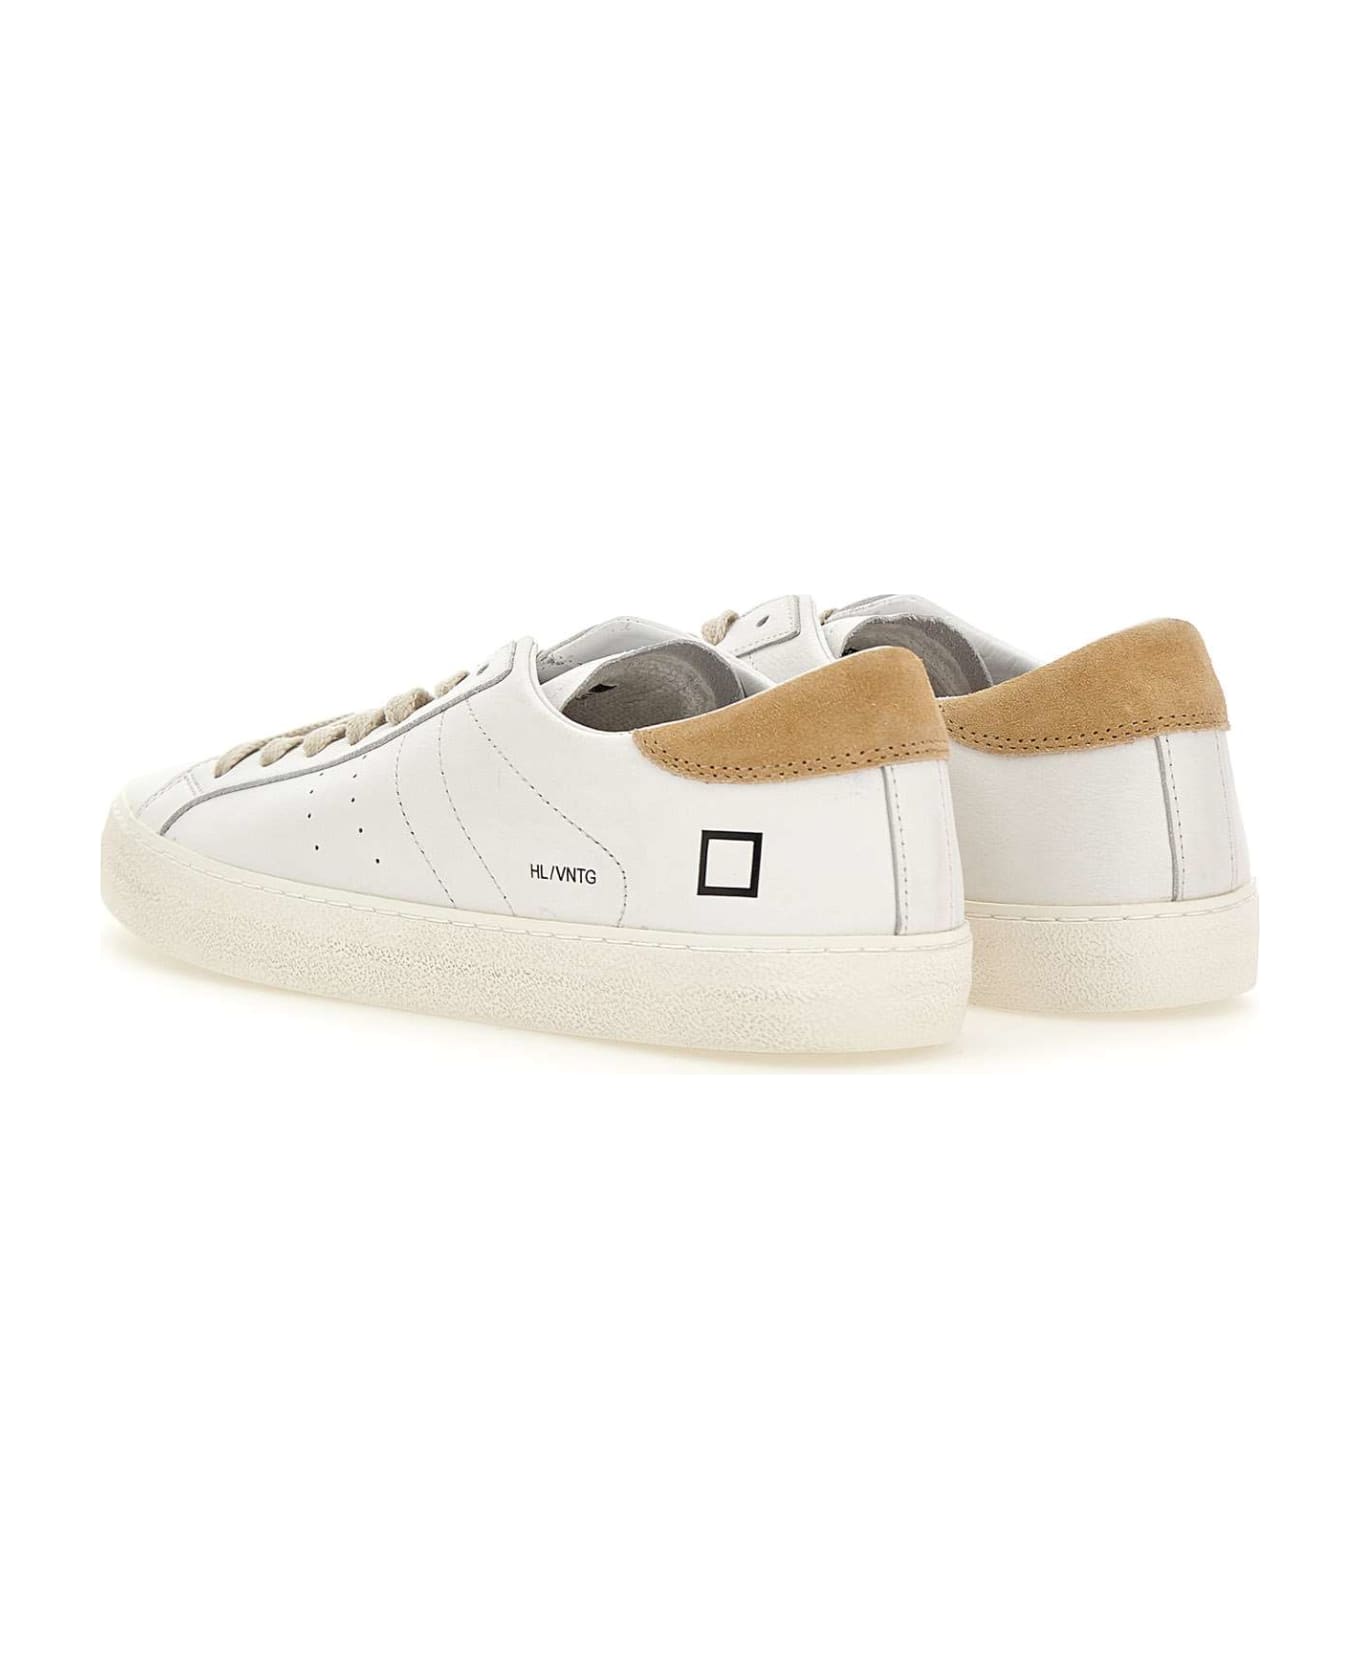 D.A.T.E. "hillow Vintage Calf" Leather Sneakers - WHITE スニーカー